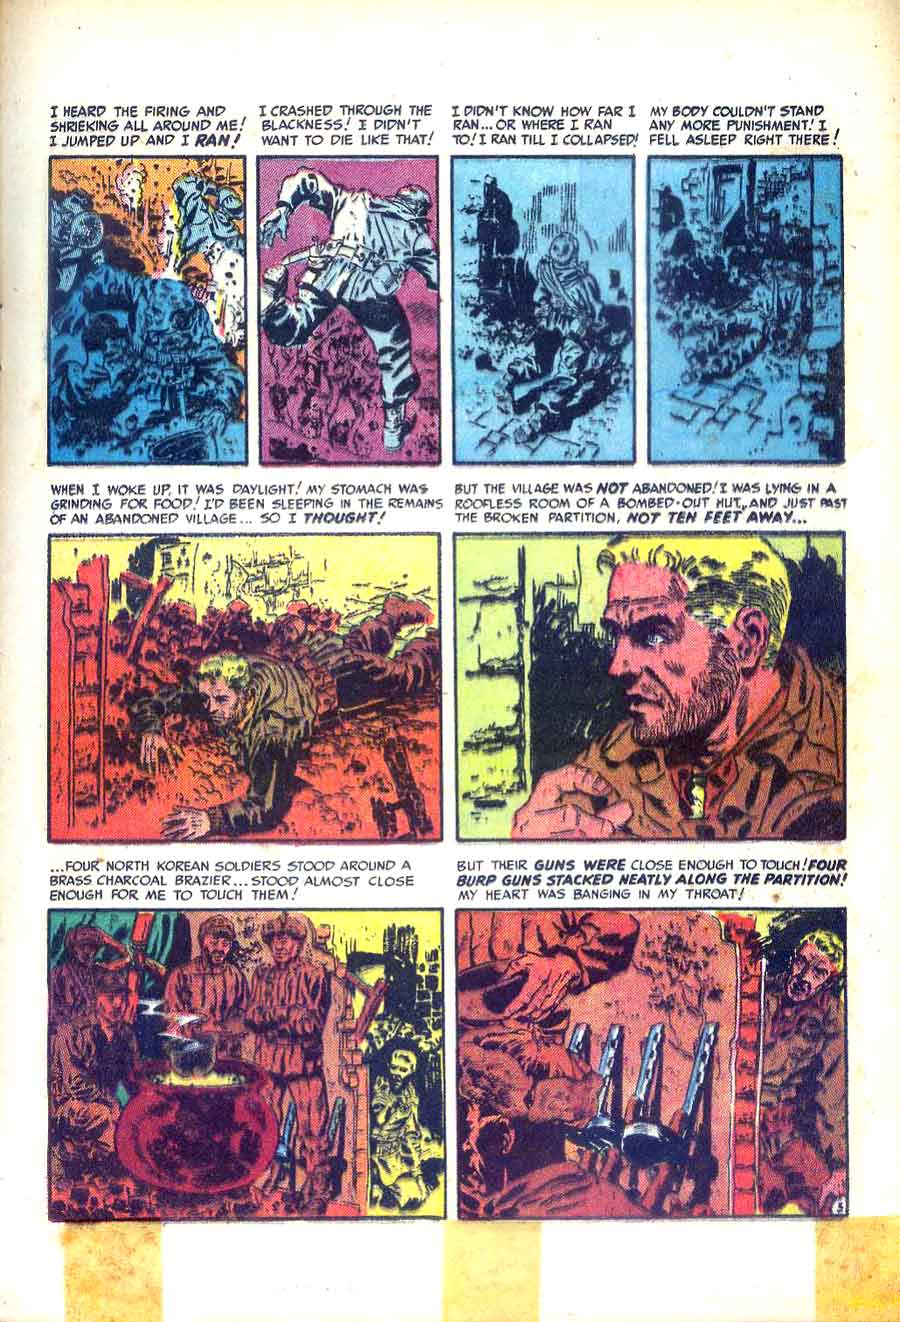 Two-Fisted Tales v1 #24 - Wally Wood ec war golden age comic book page art